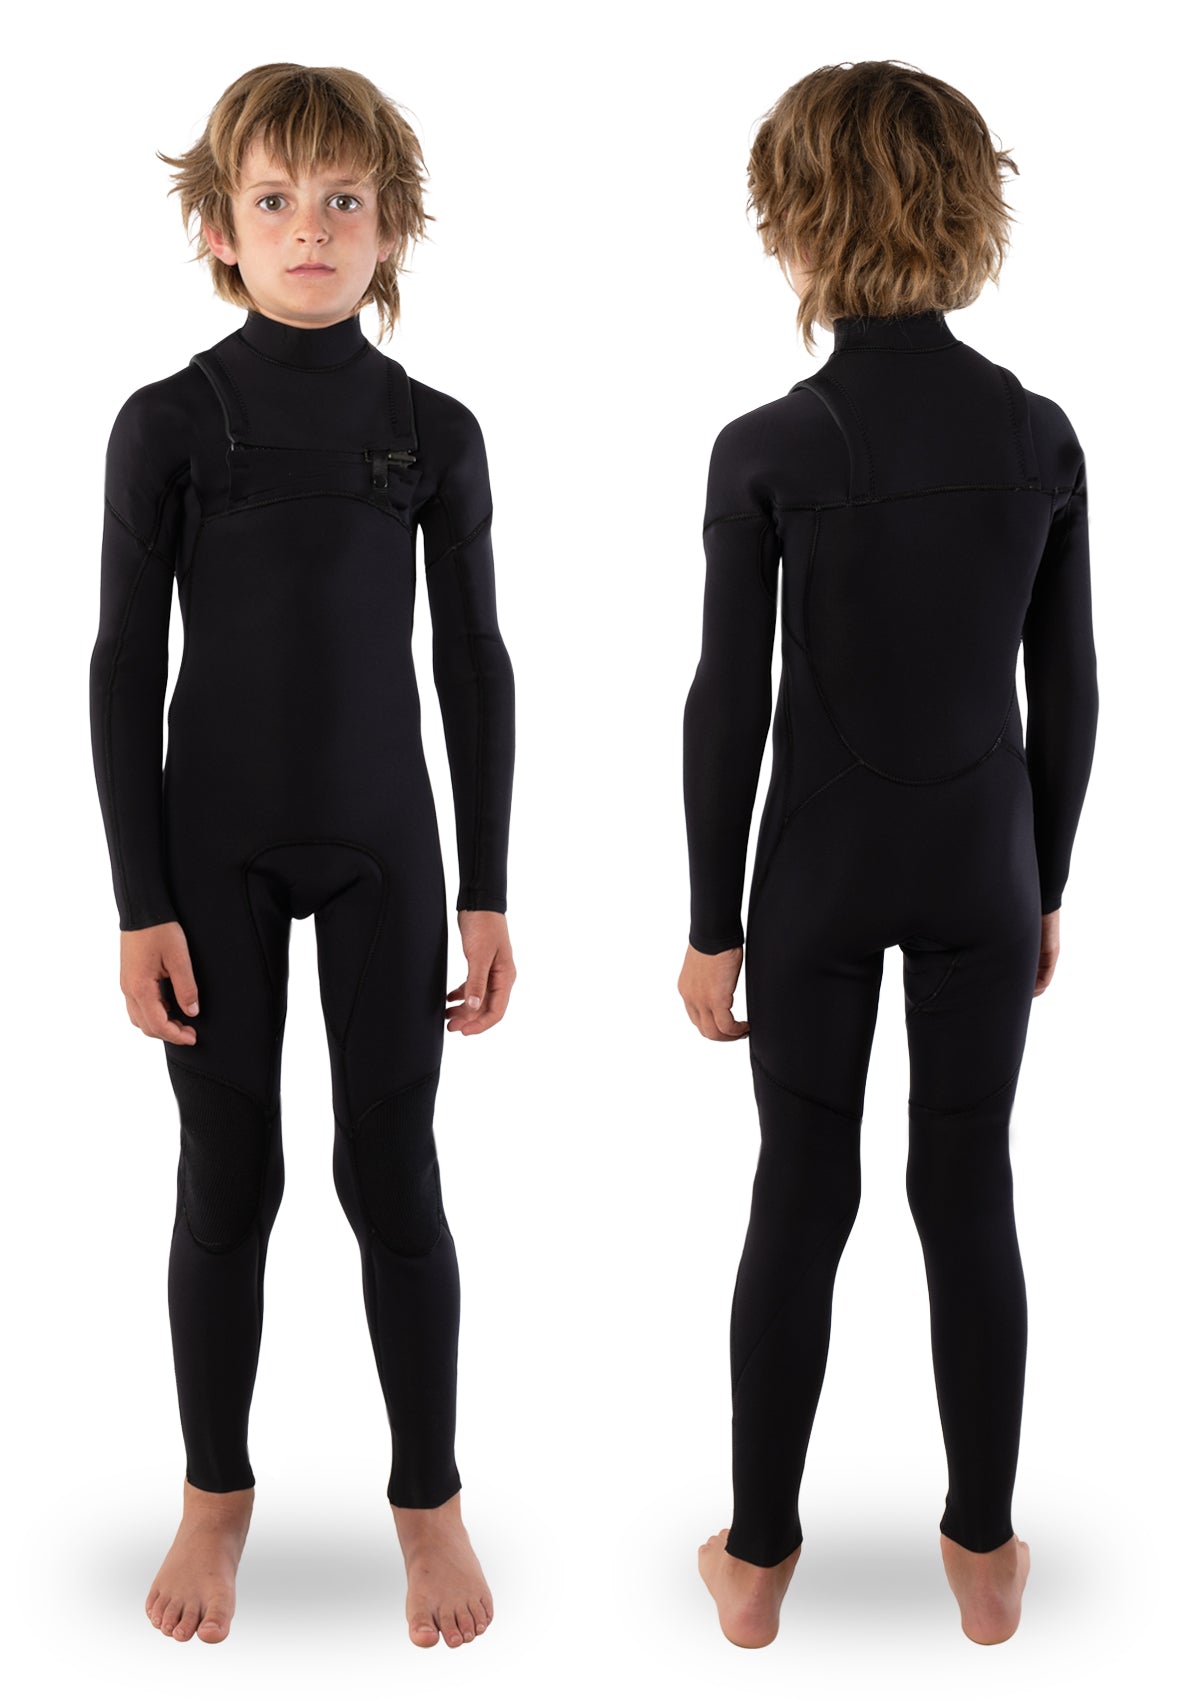 Kids 3/2 Thermal Chest Zip Wetsuit